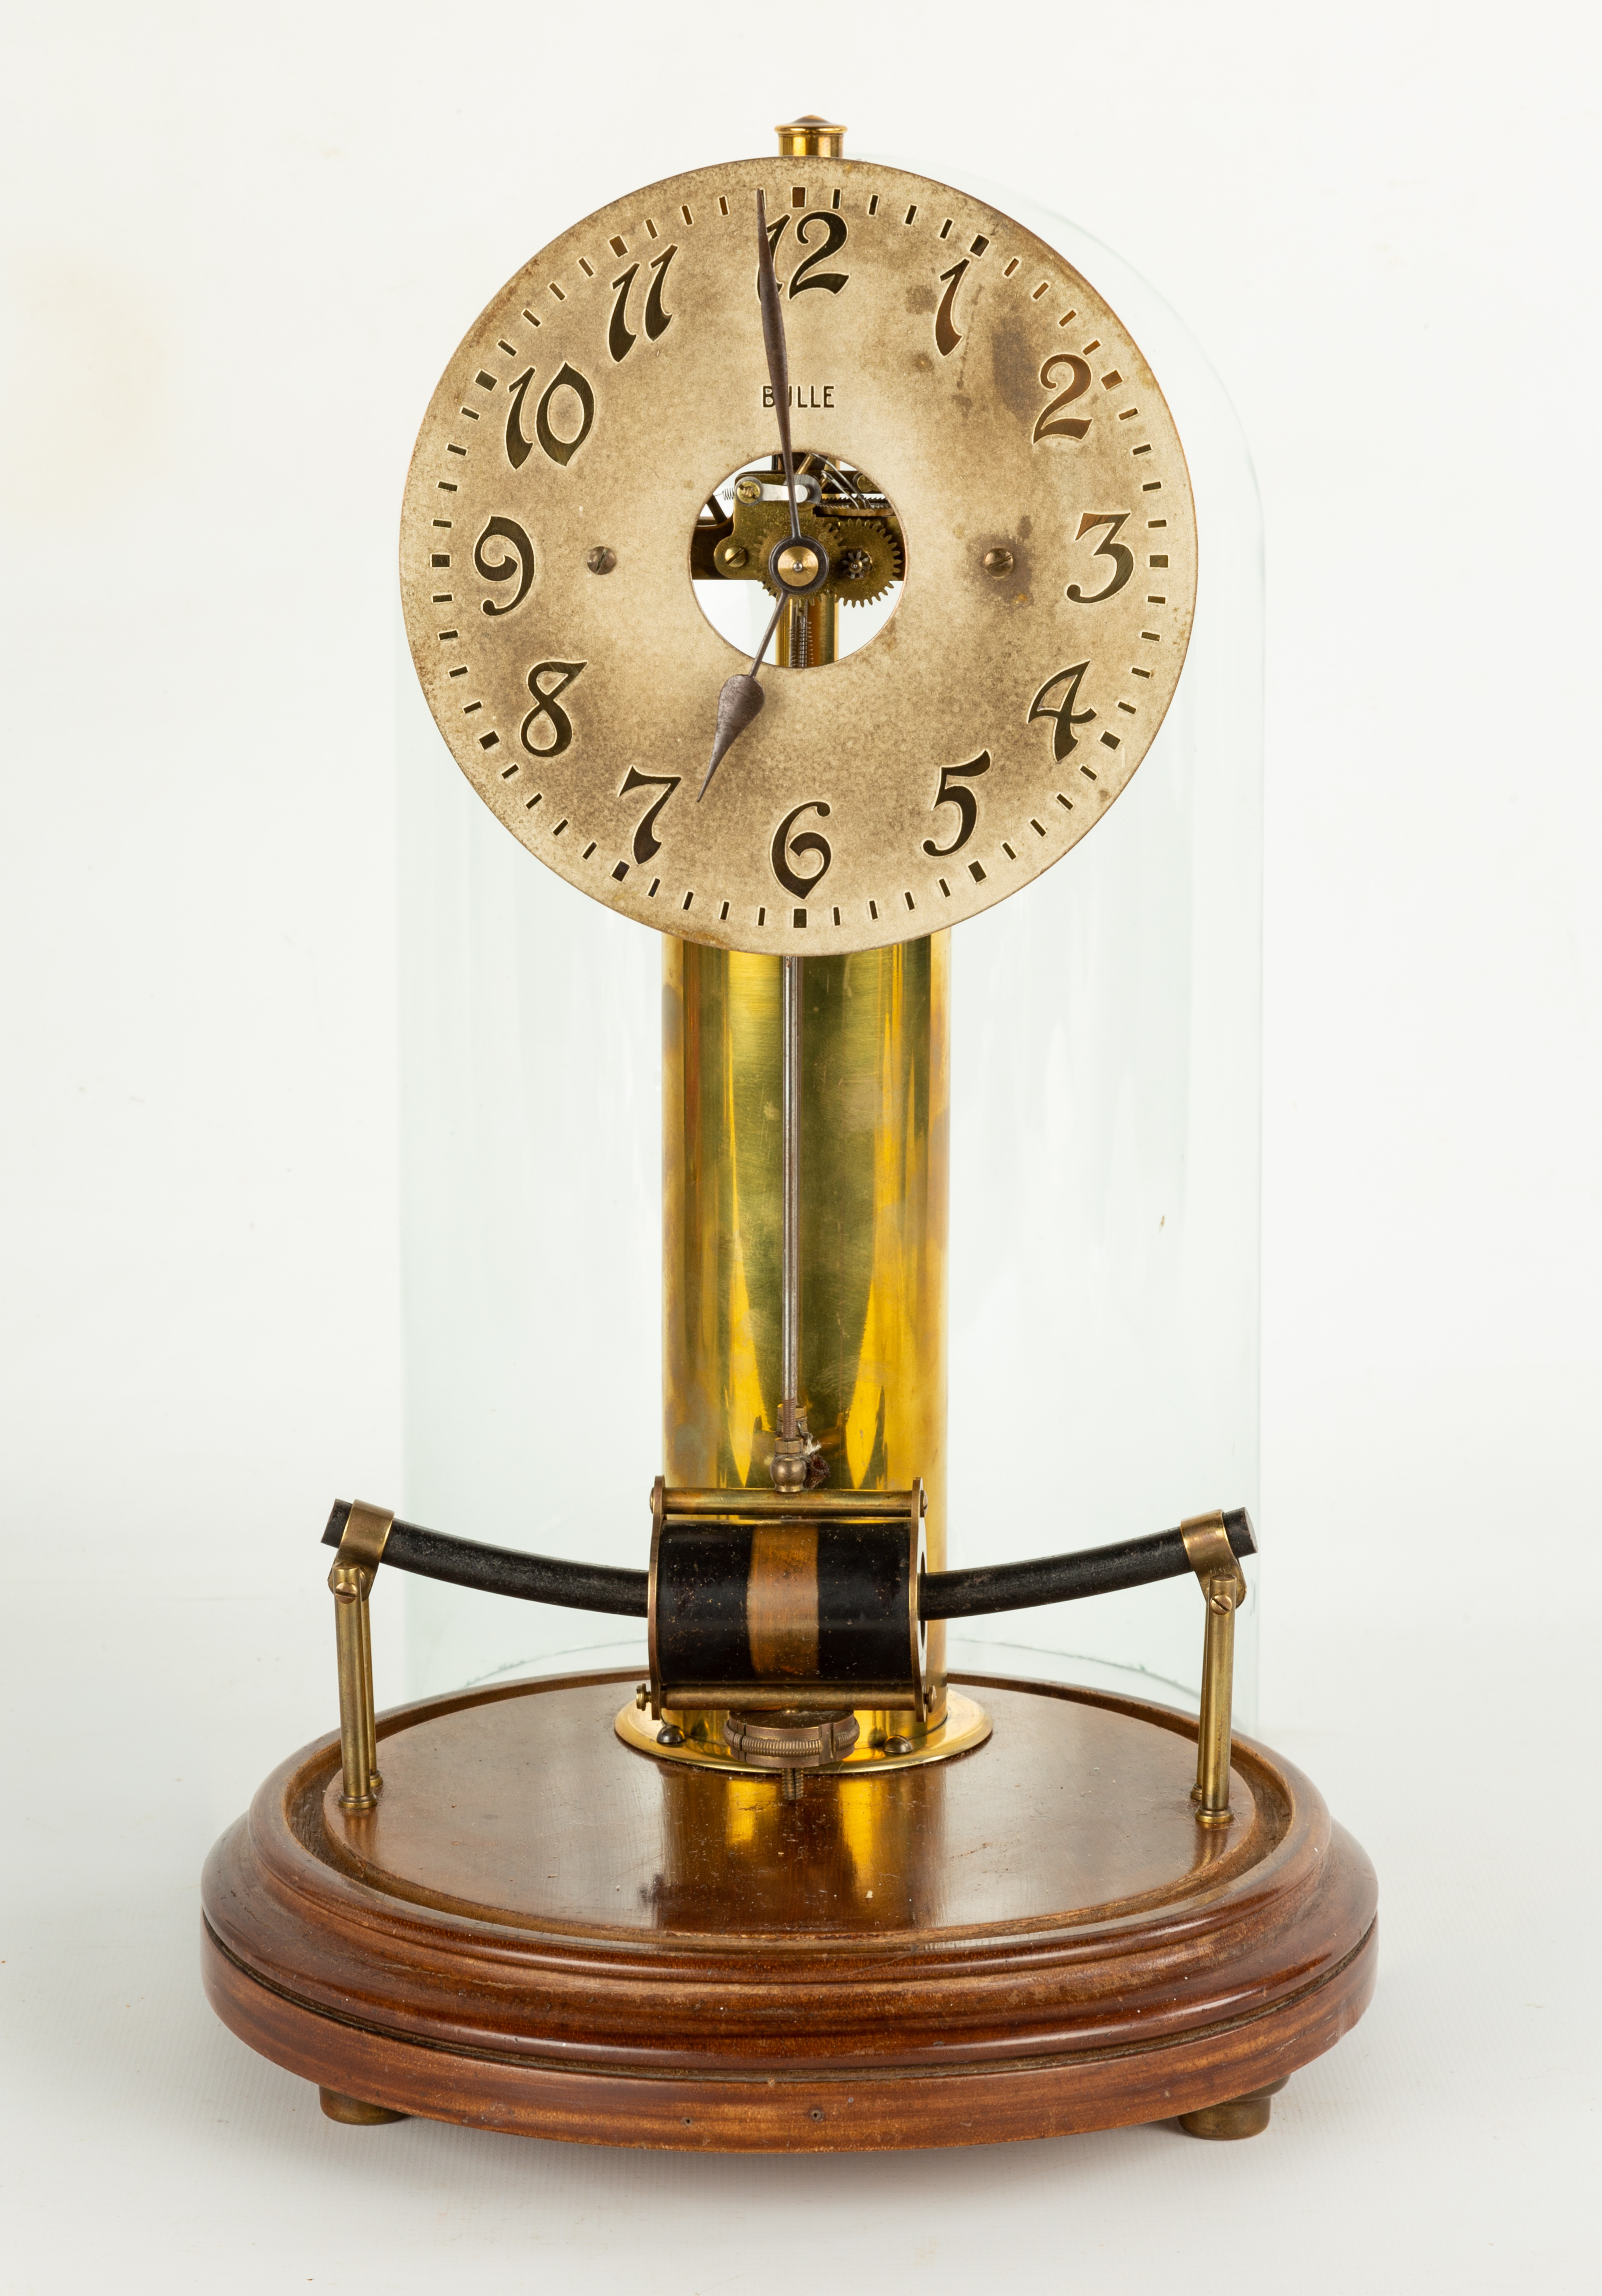 BULLE CLOCK Early 20th century. Battery